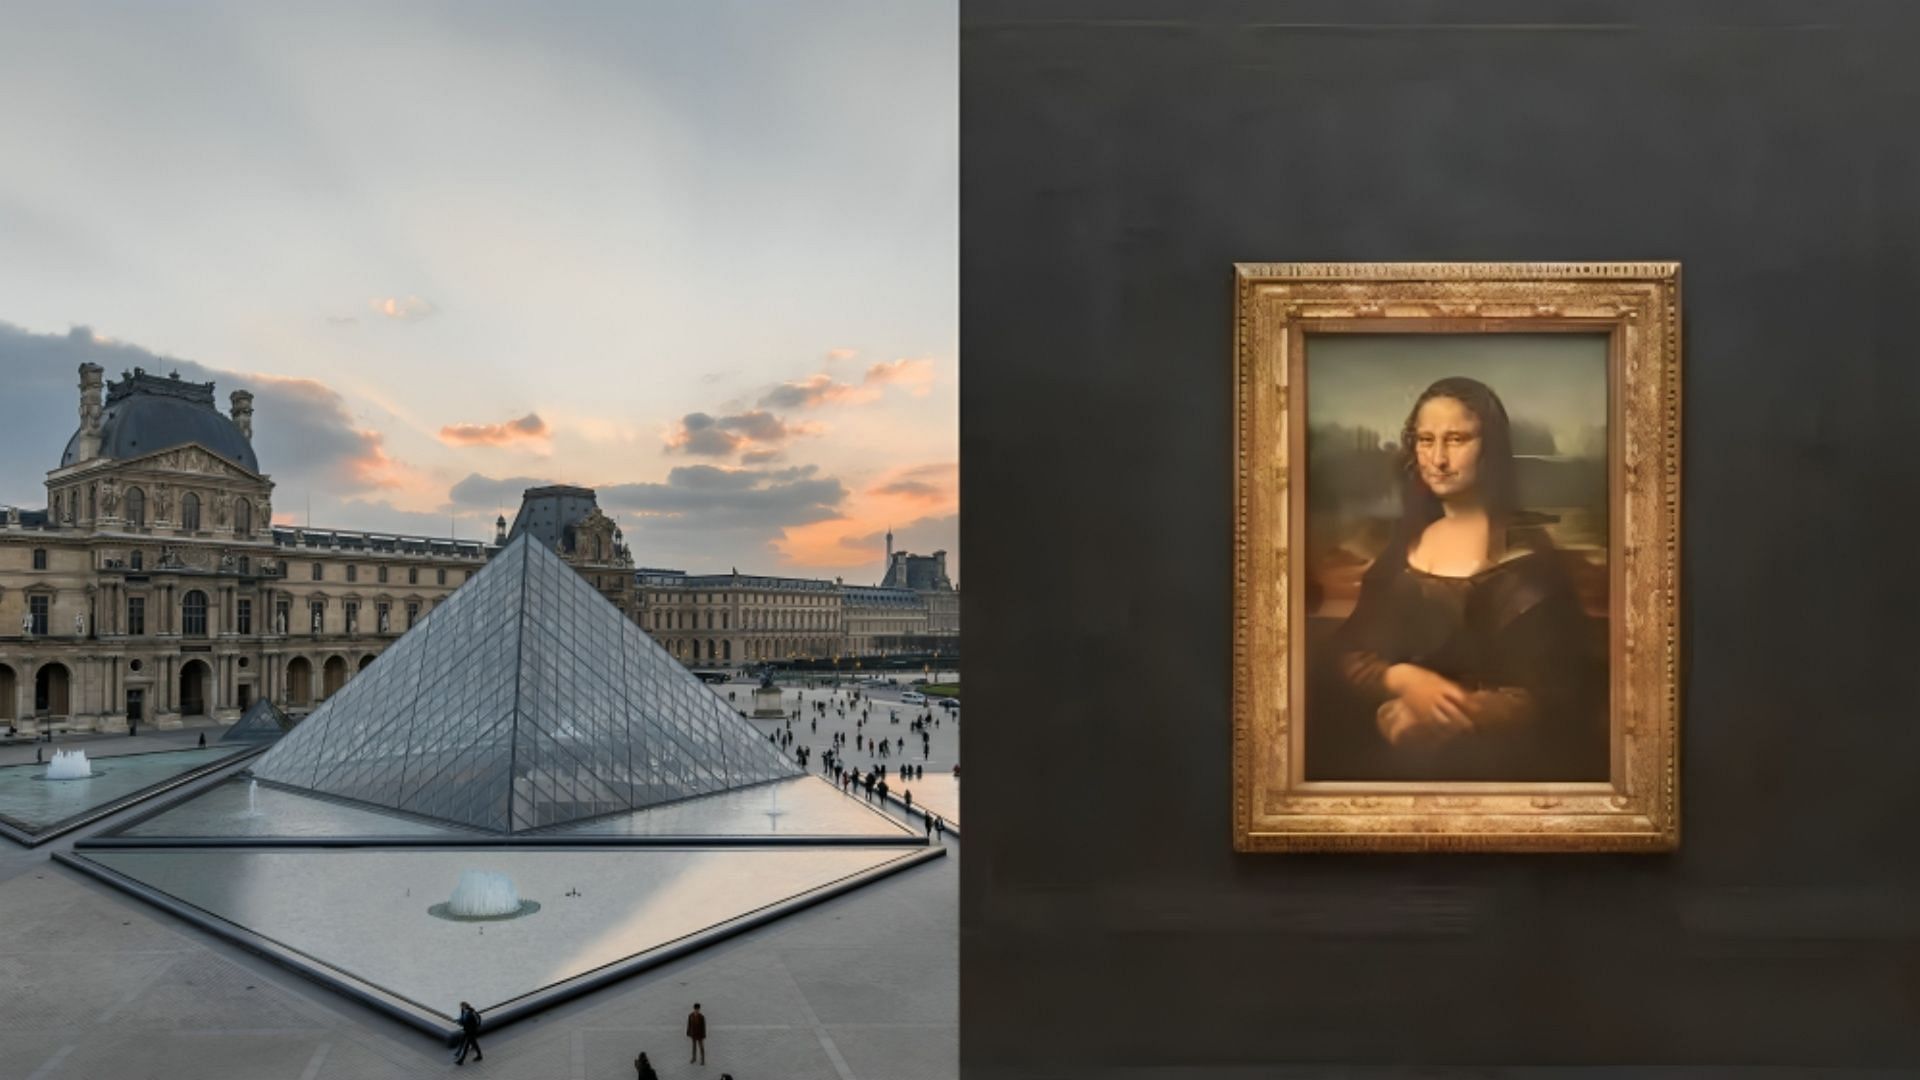 The painting of Mona Lisa is currently in Paris